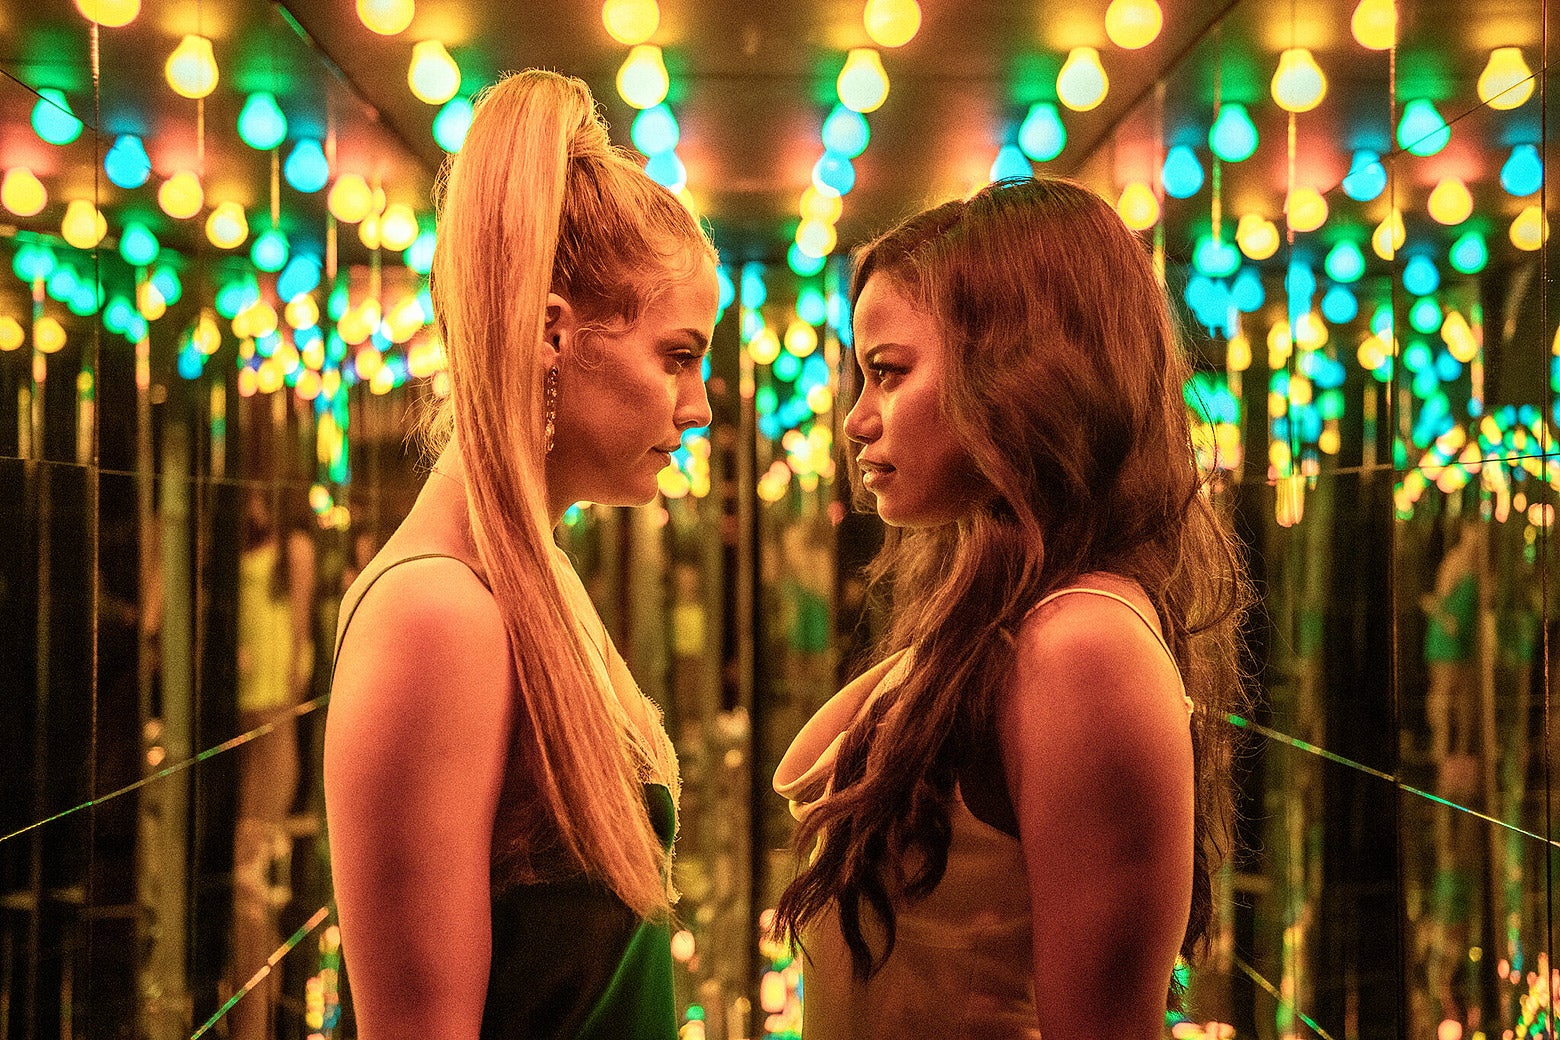 Taylour Paige and Riley Keough looking into each others eyes.